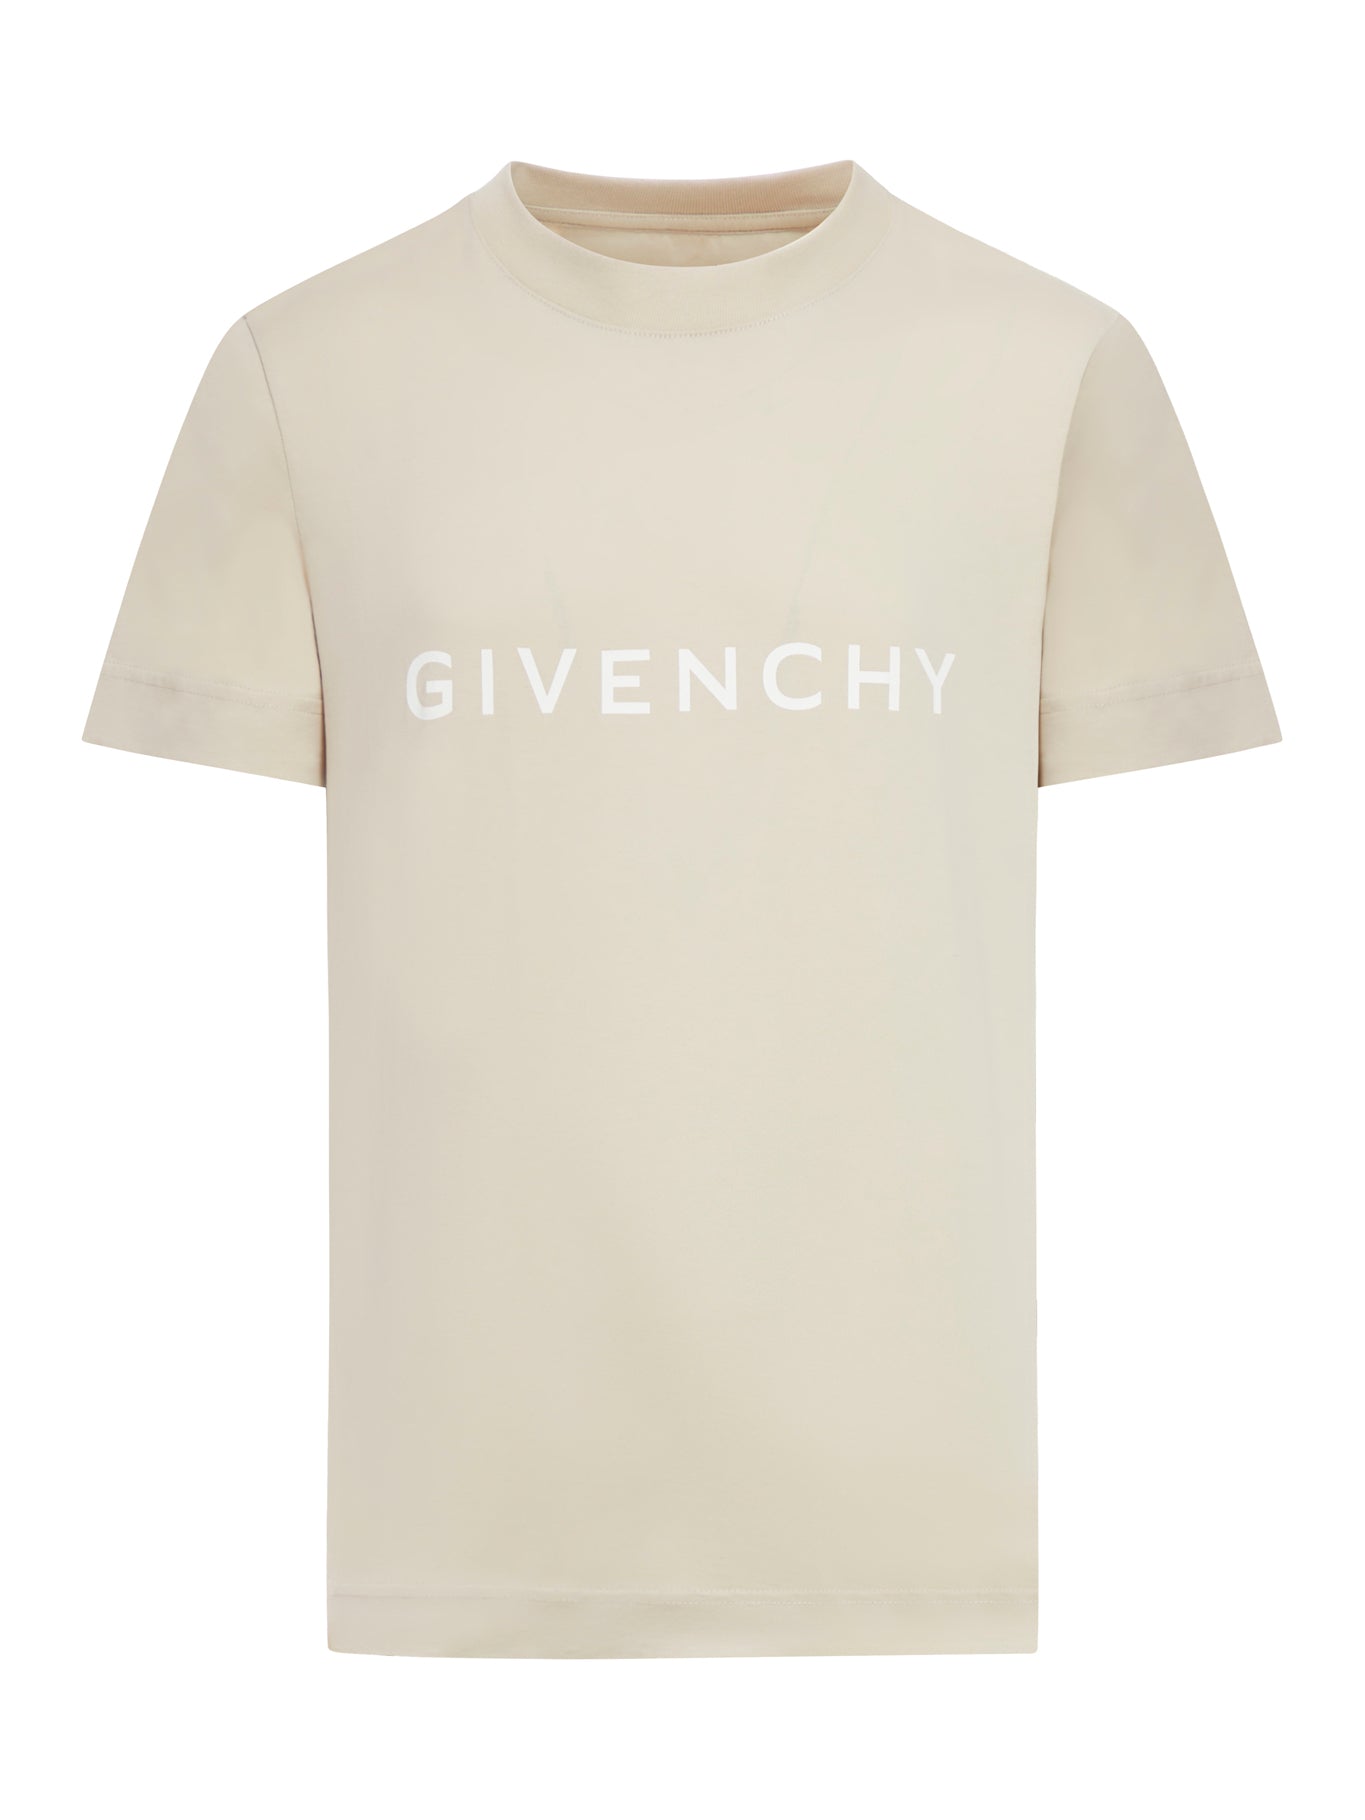 GIVENCHY Archetype t-shirt in cotton